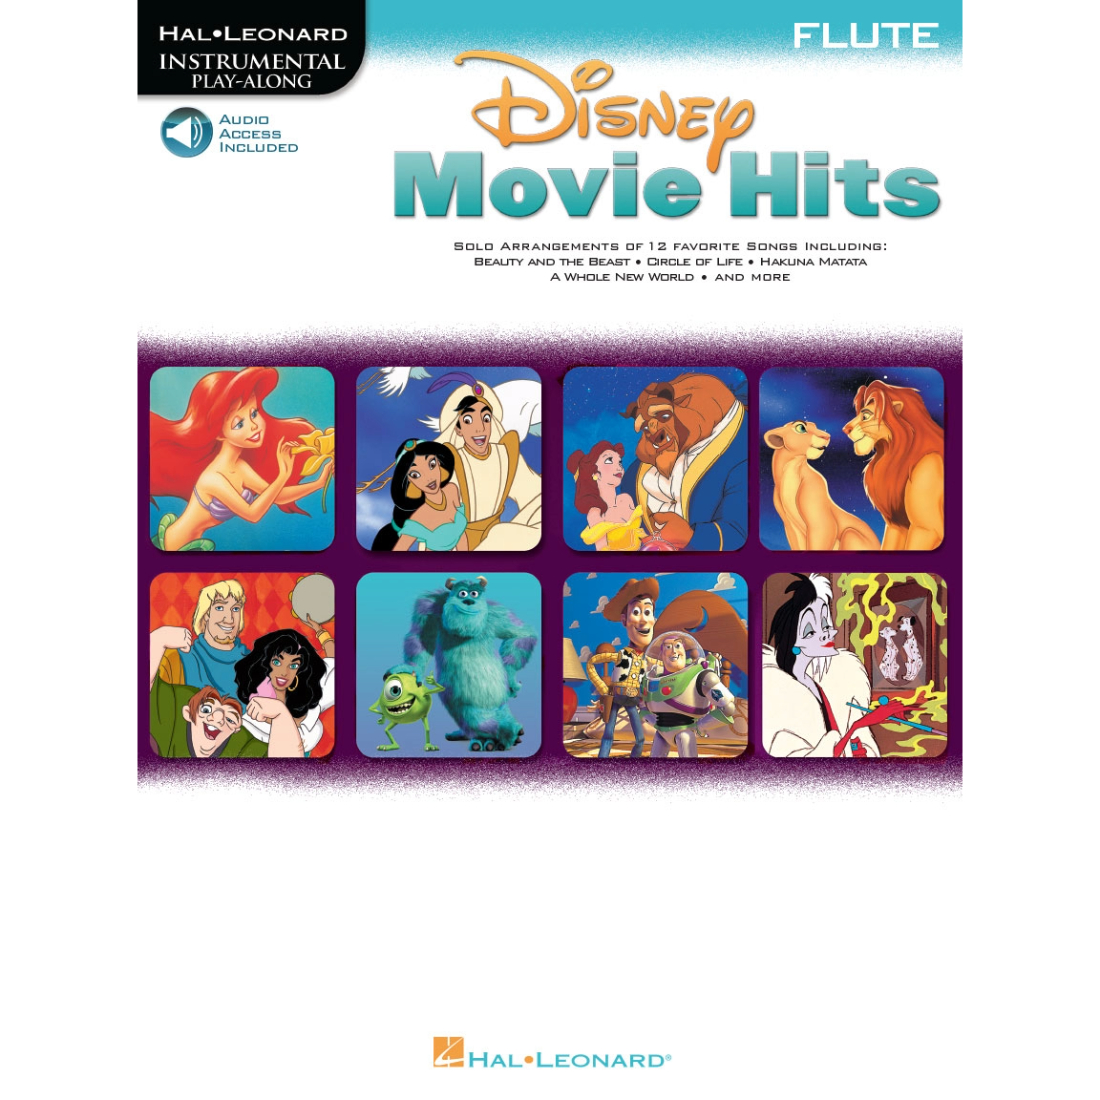 White cover with images from Disney movies, titled Disney movie hits